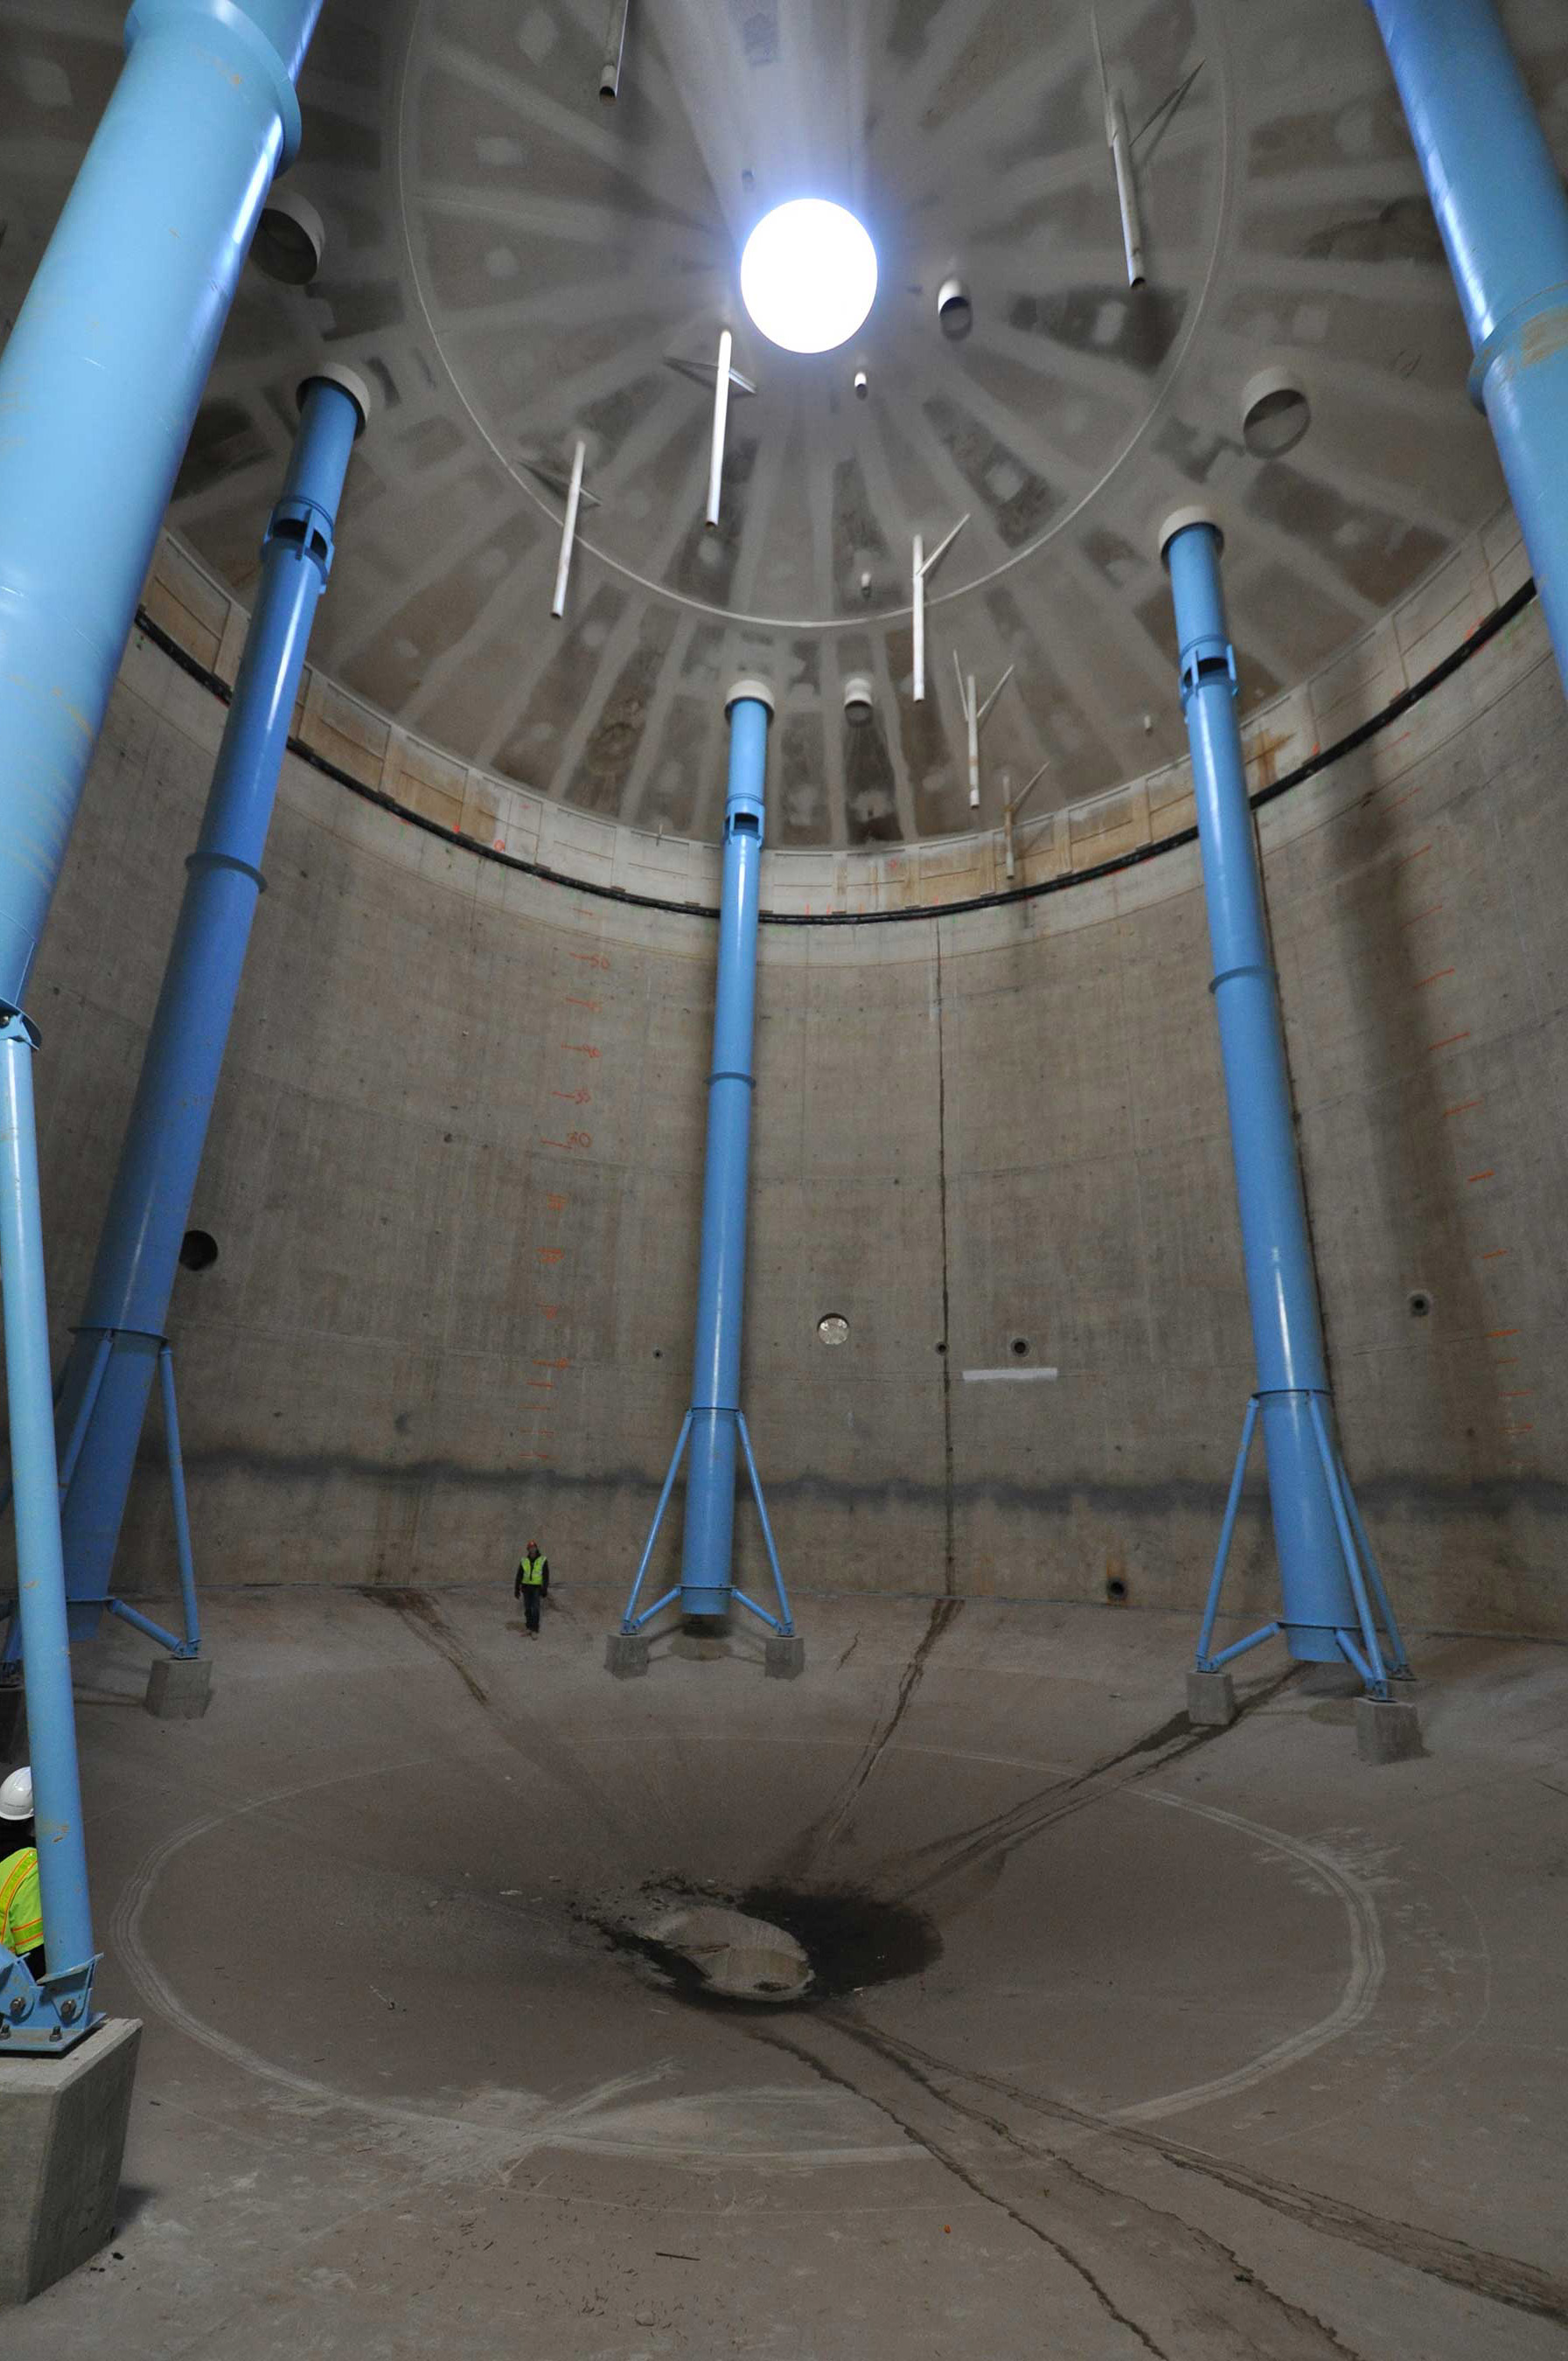 A rare look inside a concrete digester during construction. The digesters are full of biosolids now.